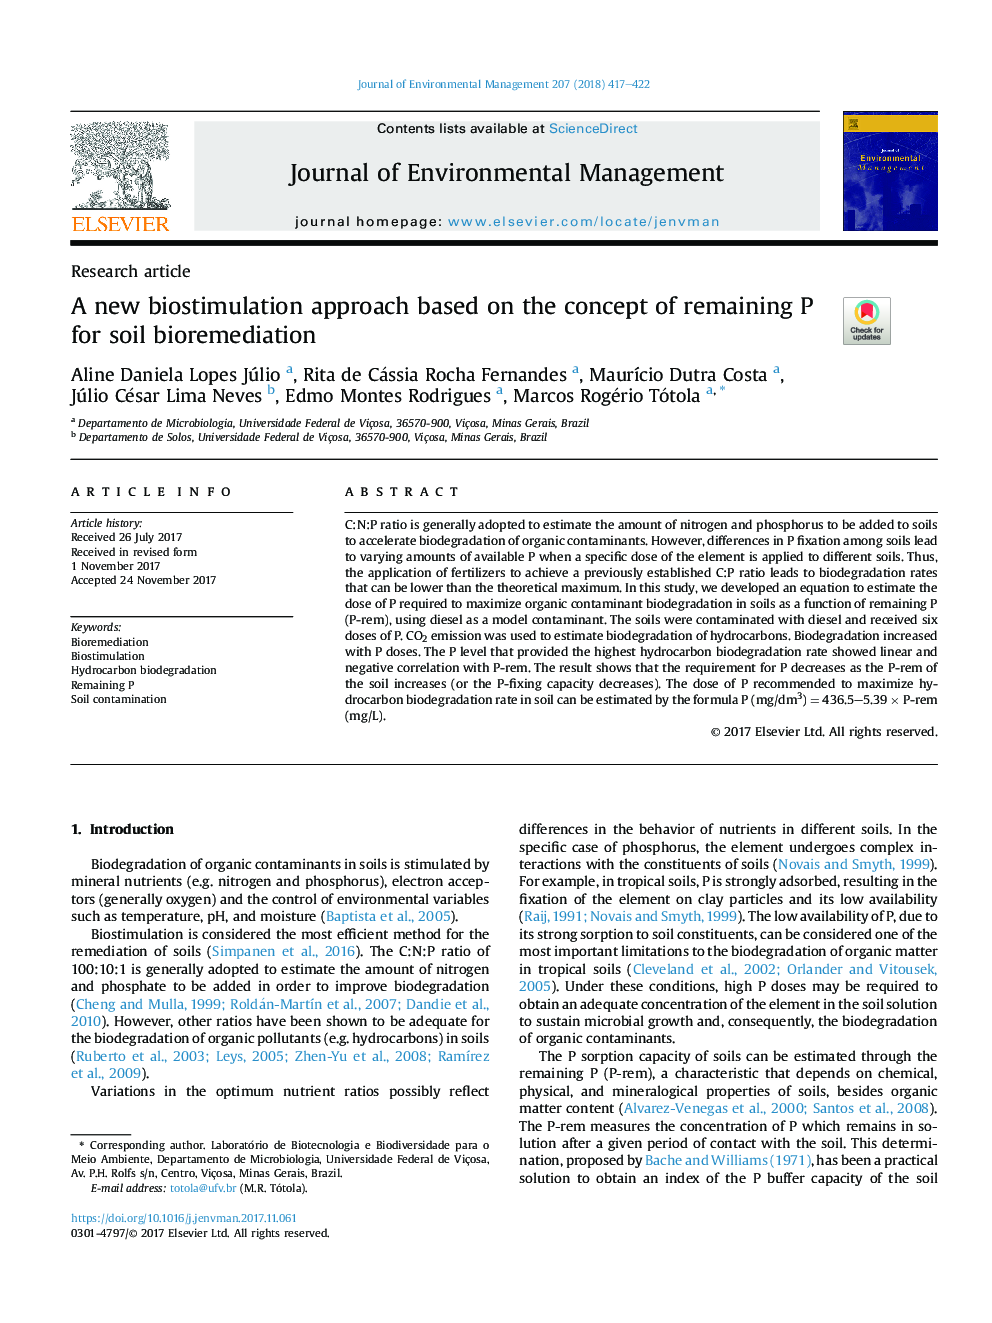 A new biostimulation approach based on the concept of remaining P for soil bioremediation